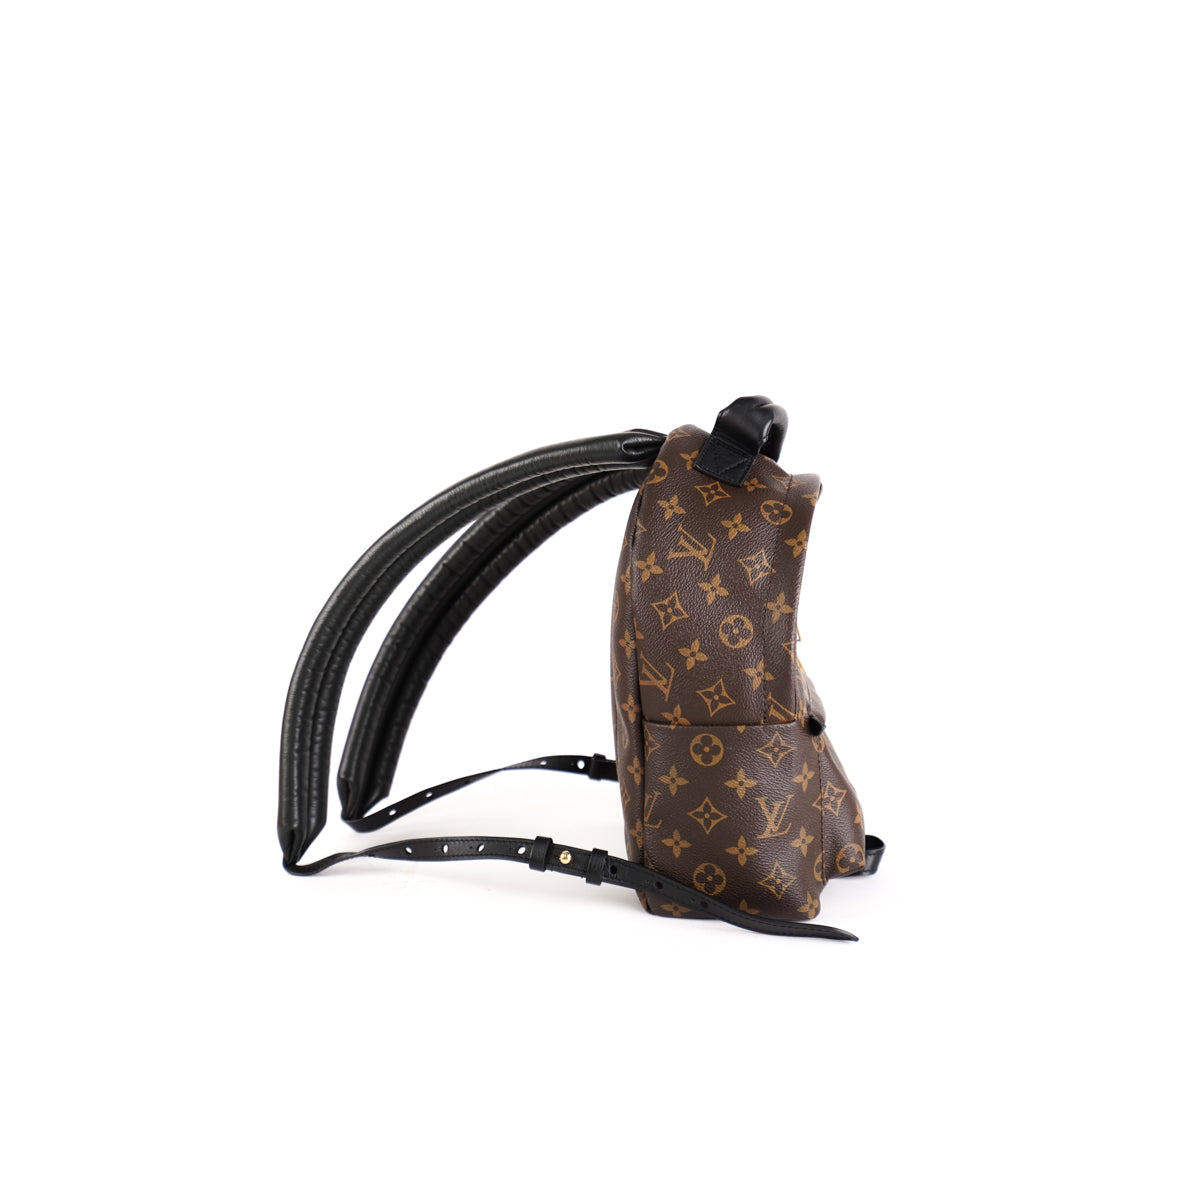 vuitton backpack pm